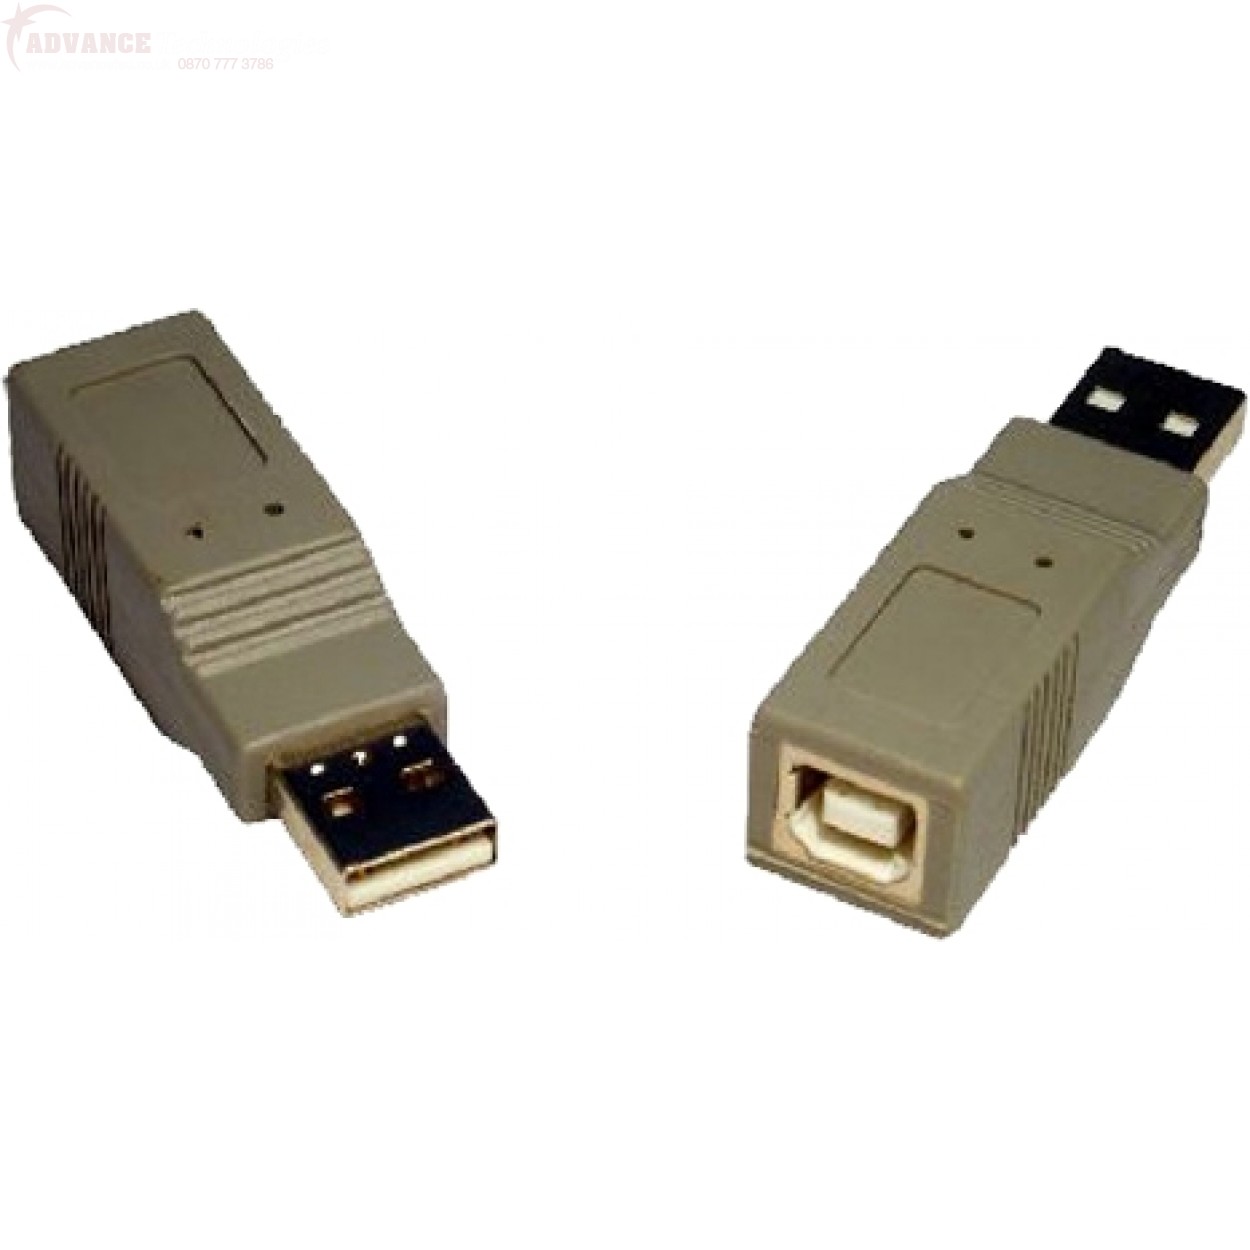 A-USB-ABMF: USB A Male to B Female adapter